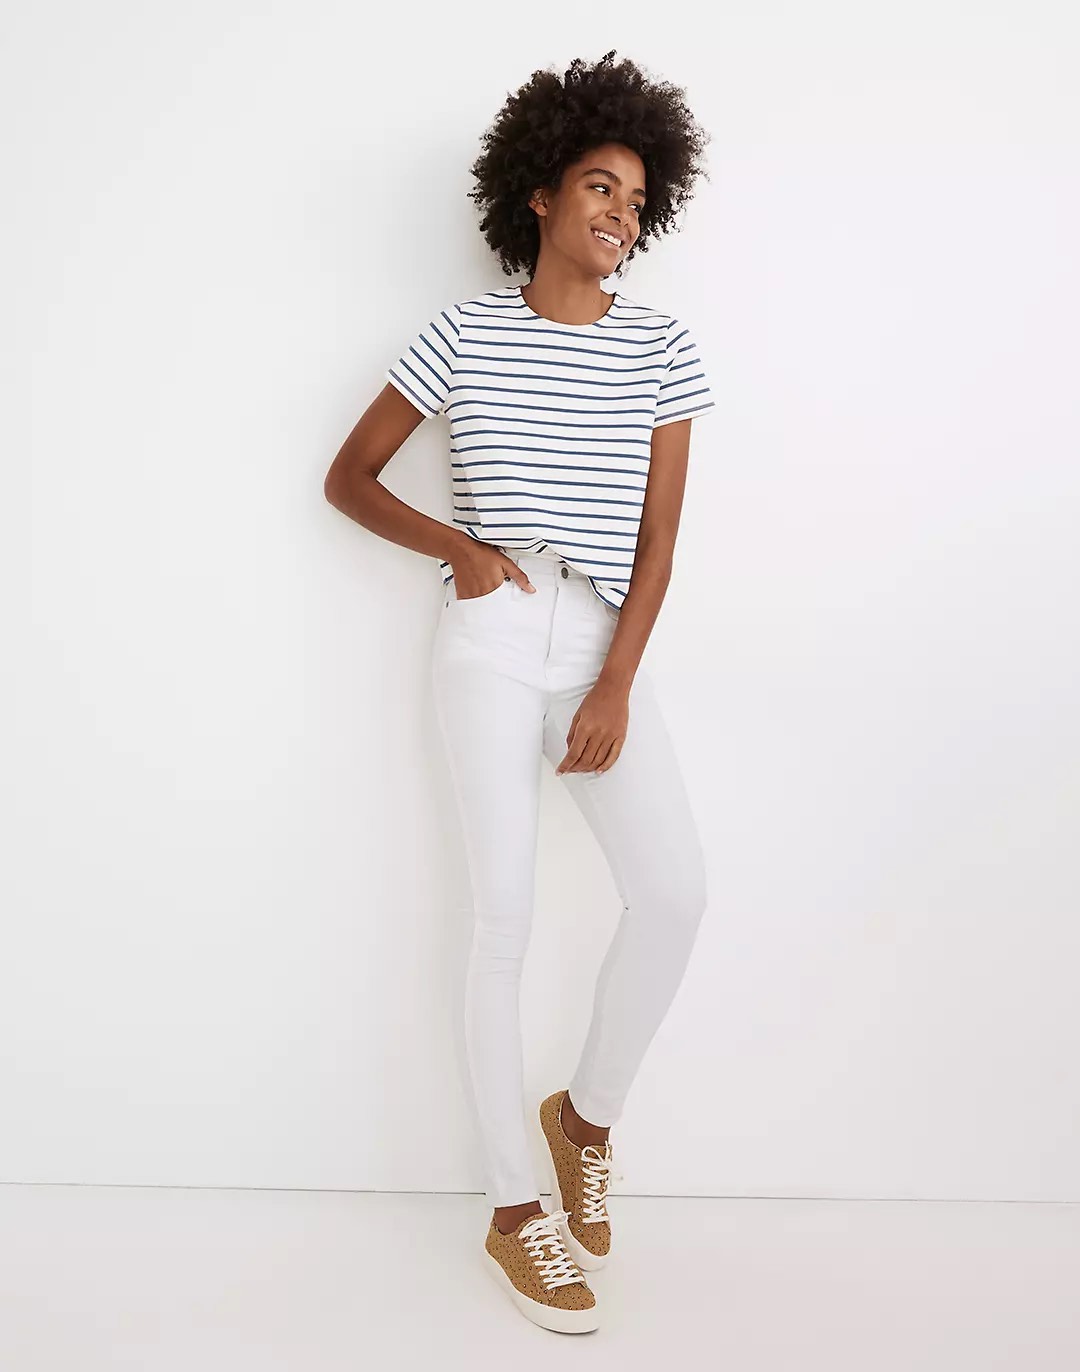 8 Best Things To Buy at the Madewell Secret Stock Sale 2022 | Well+Good